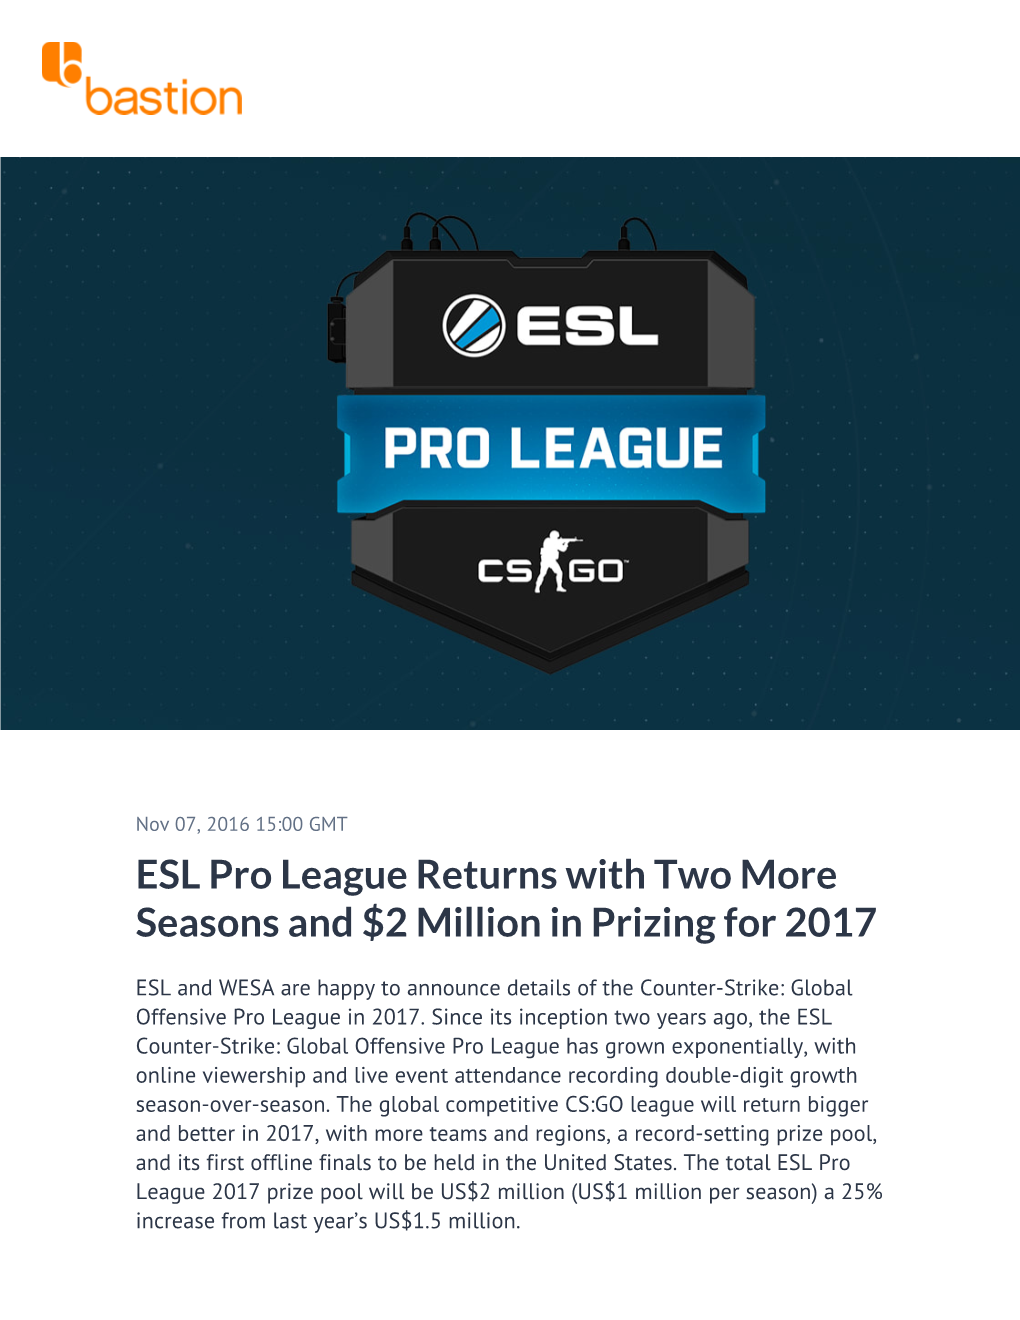 ESL Pro League Returns with Two More Seasons and $2 Million in Prizing for 2017